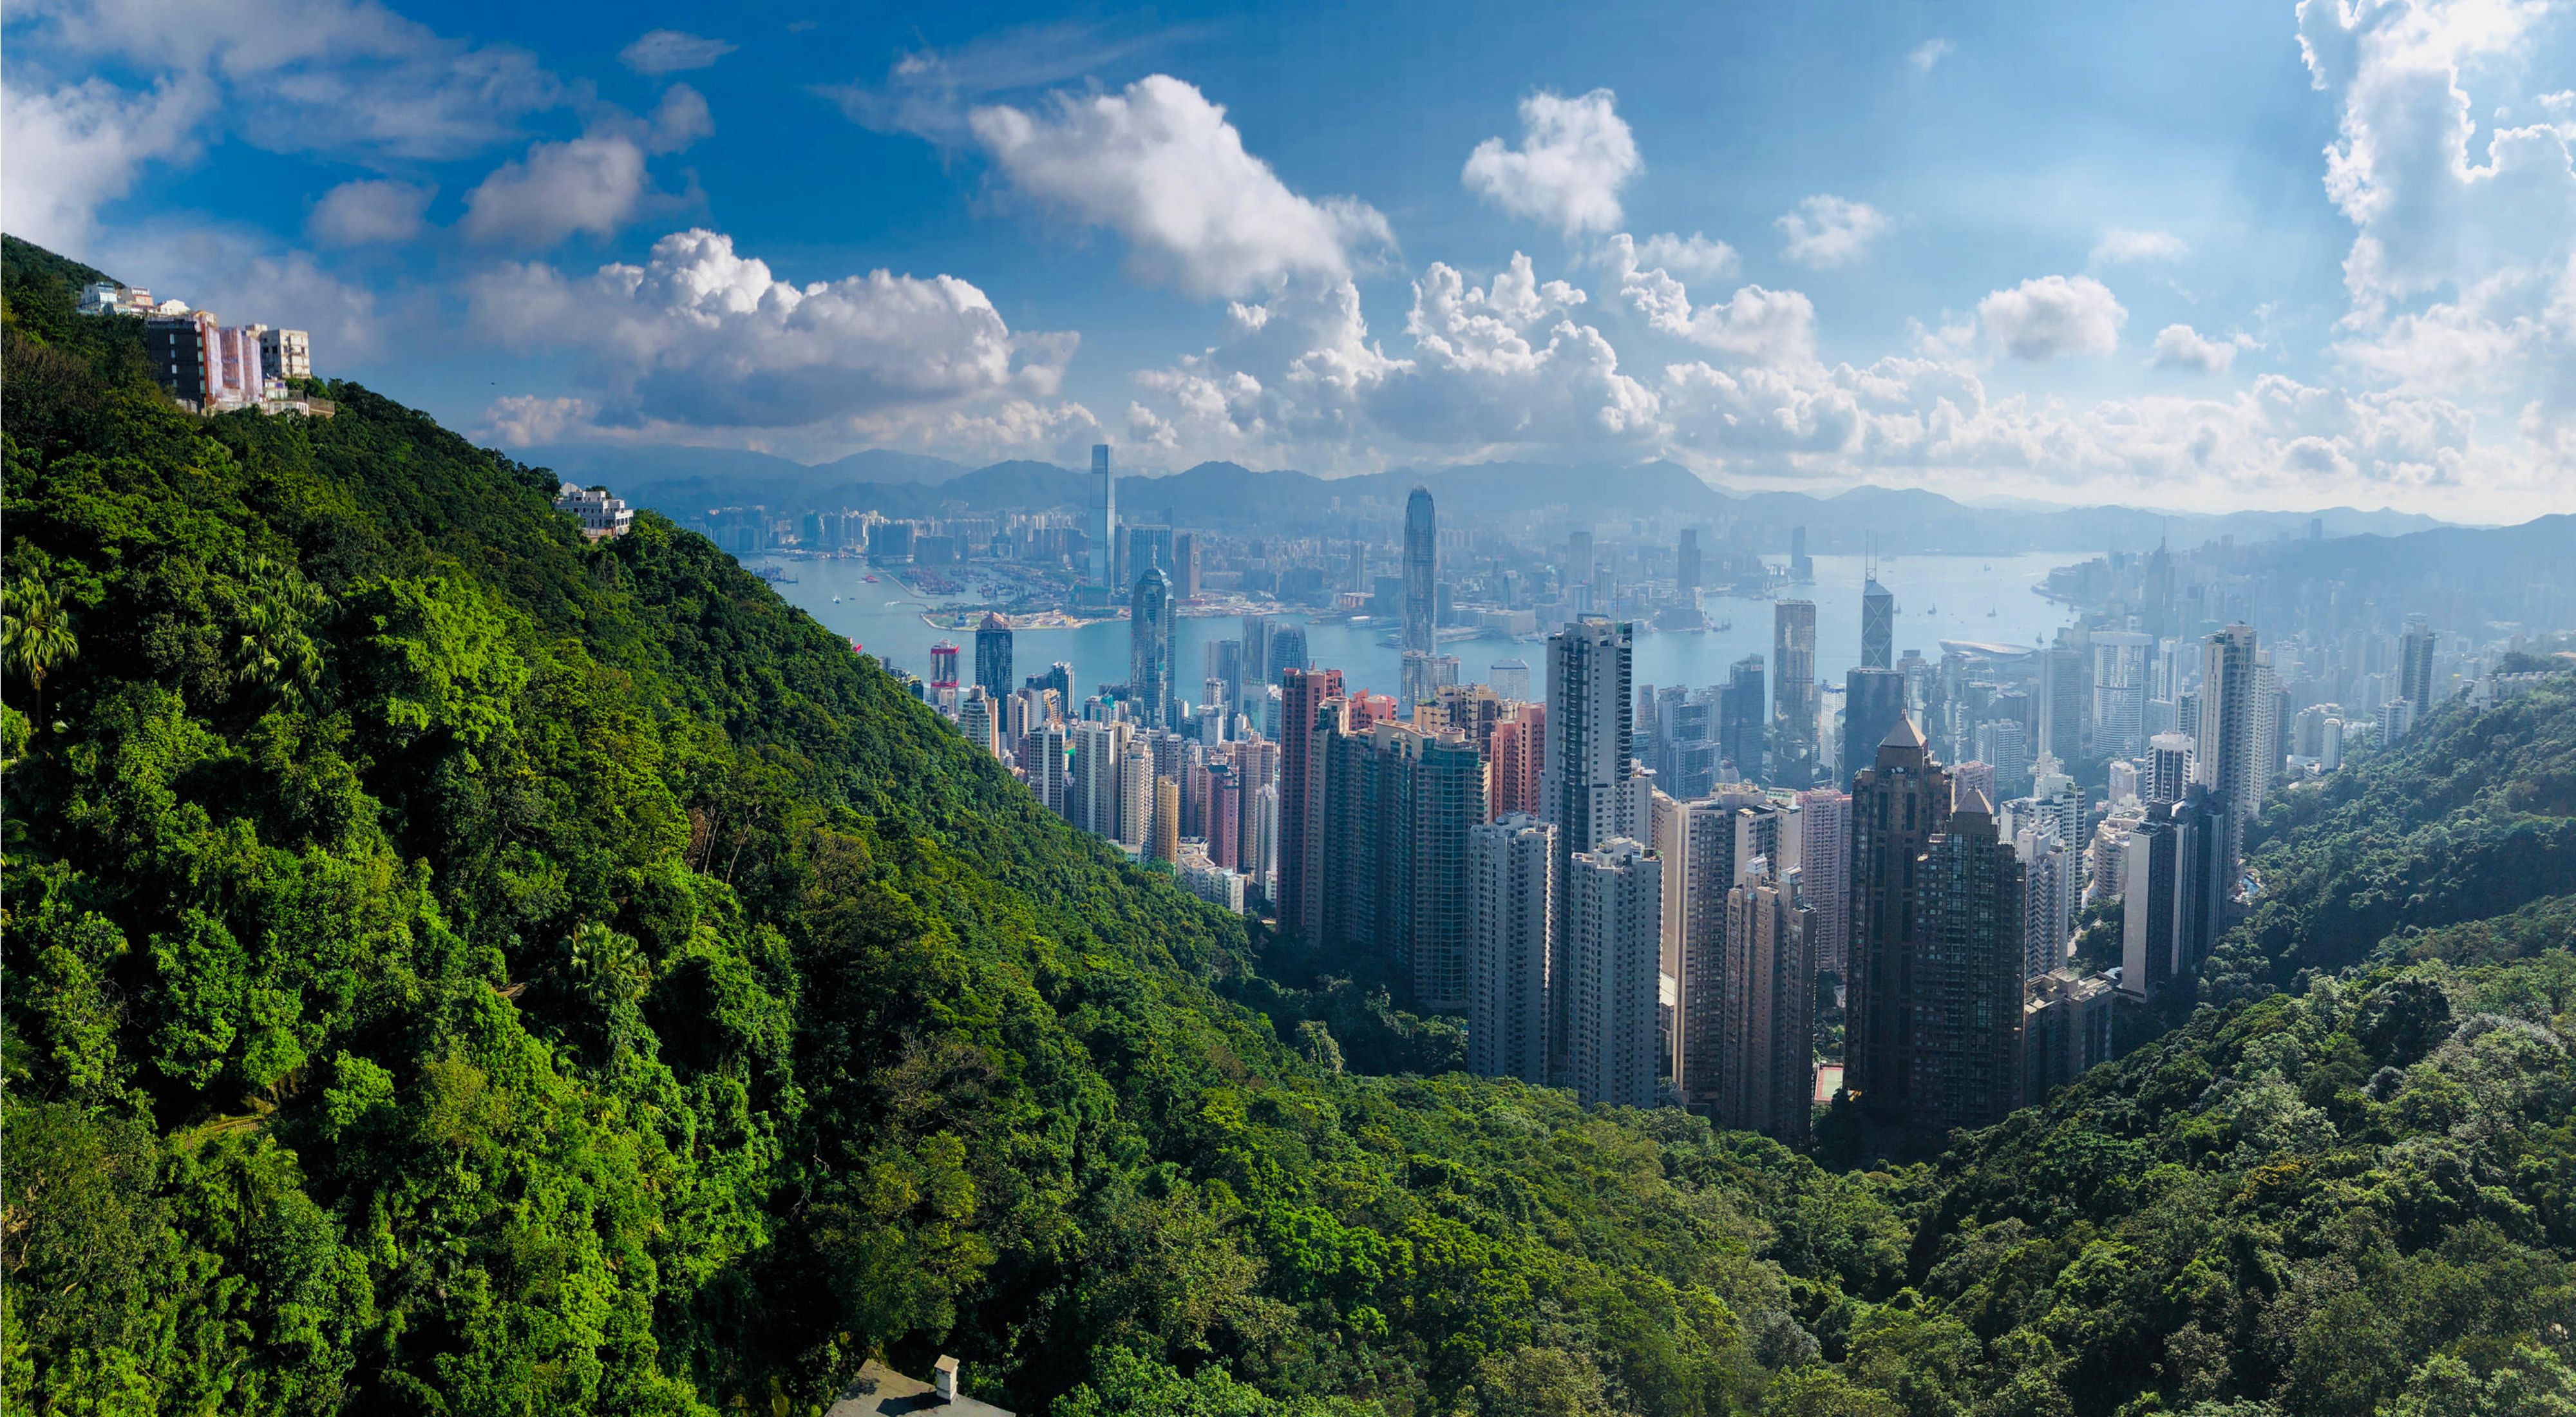 The Nature Conservancy in Hong Kong